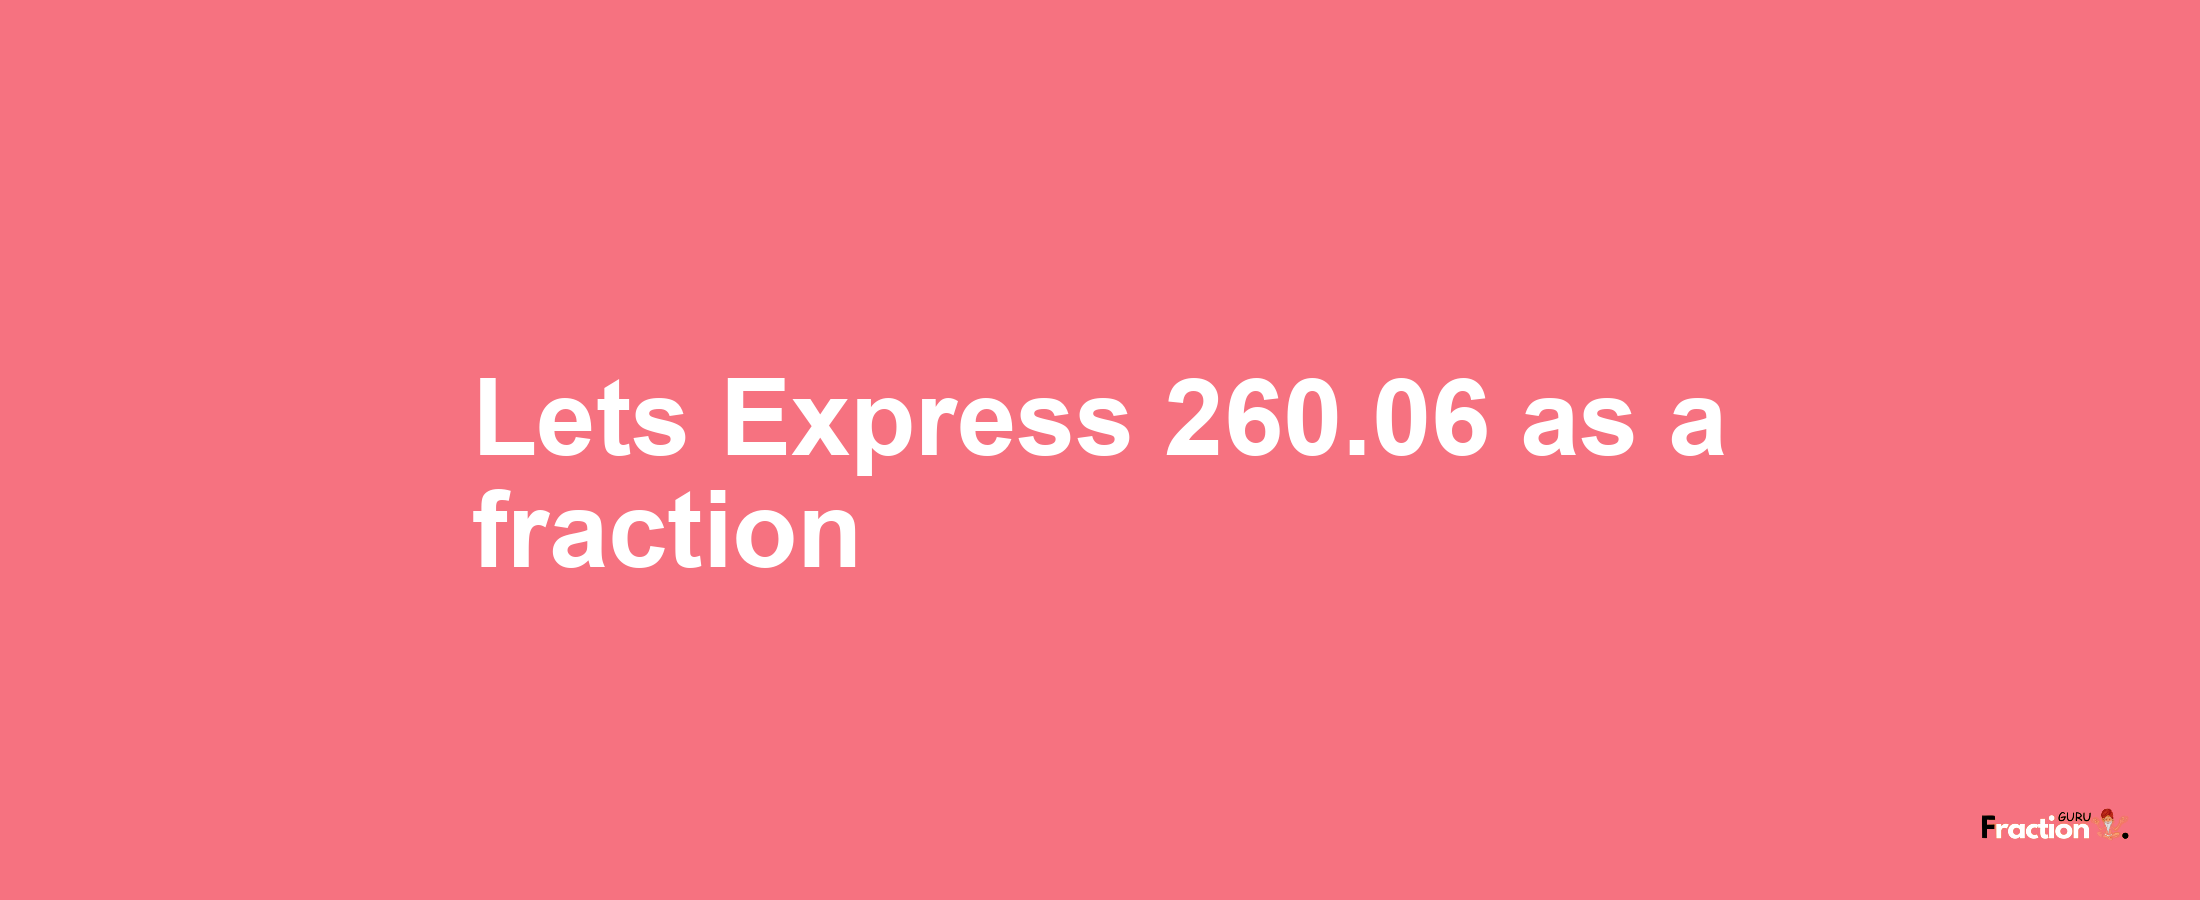 Lets Express 260.06 as afraction